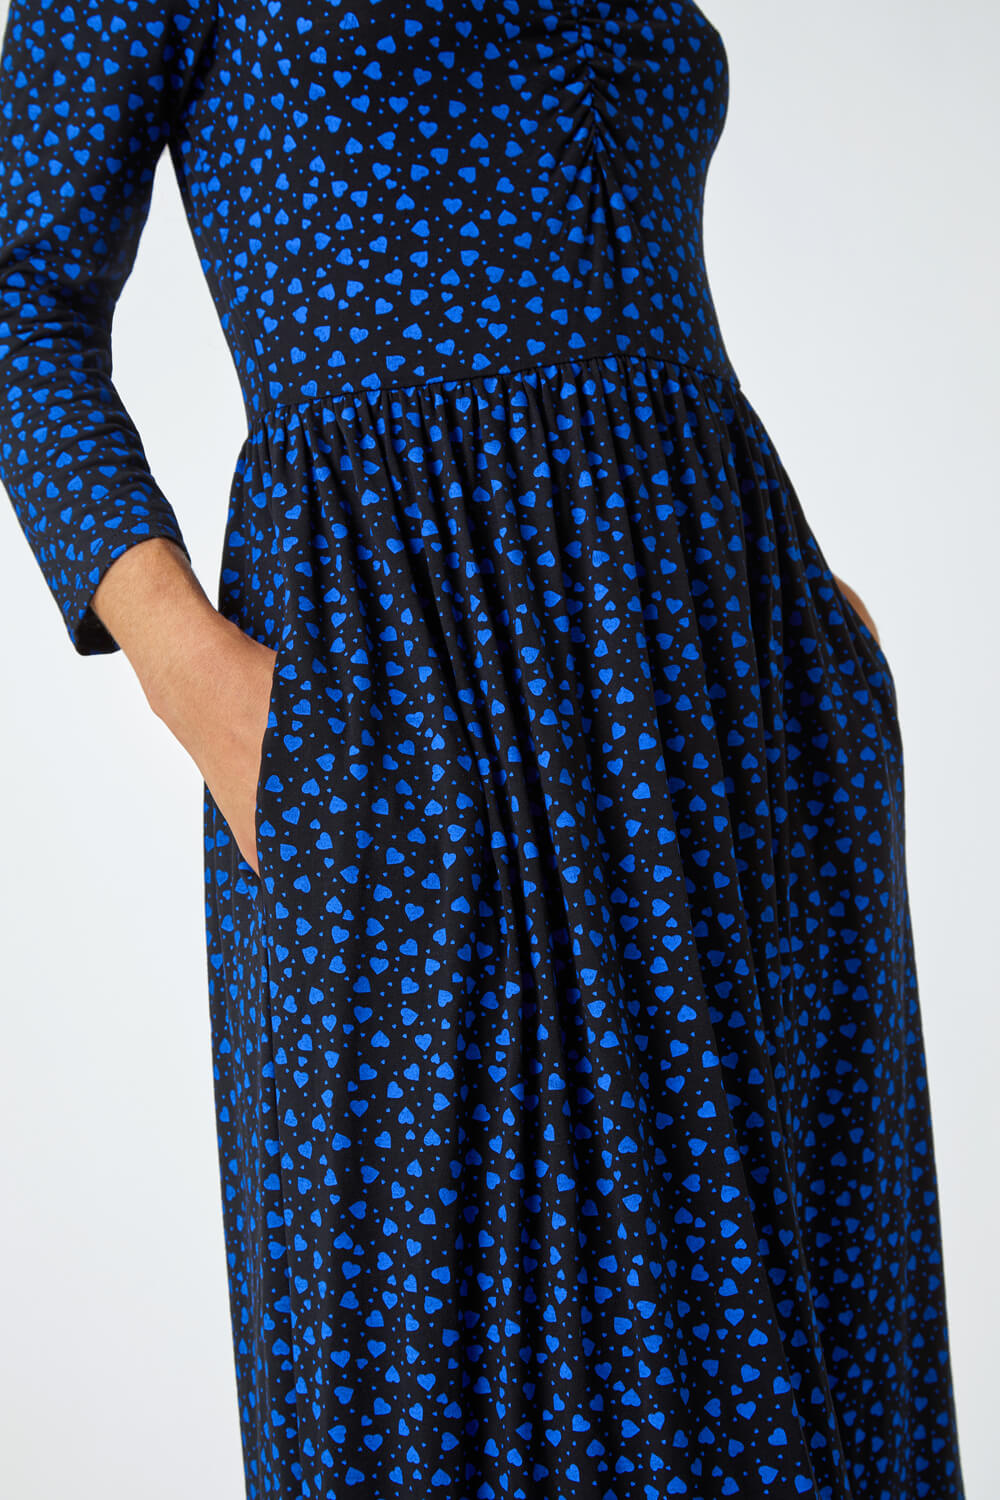 Royal Blue Heart Print Ruched Detail Stretch Midi Dress, Image 5 of 5